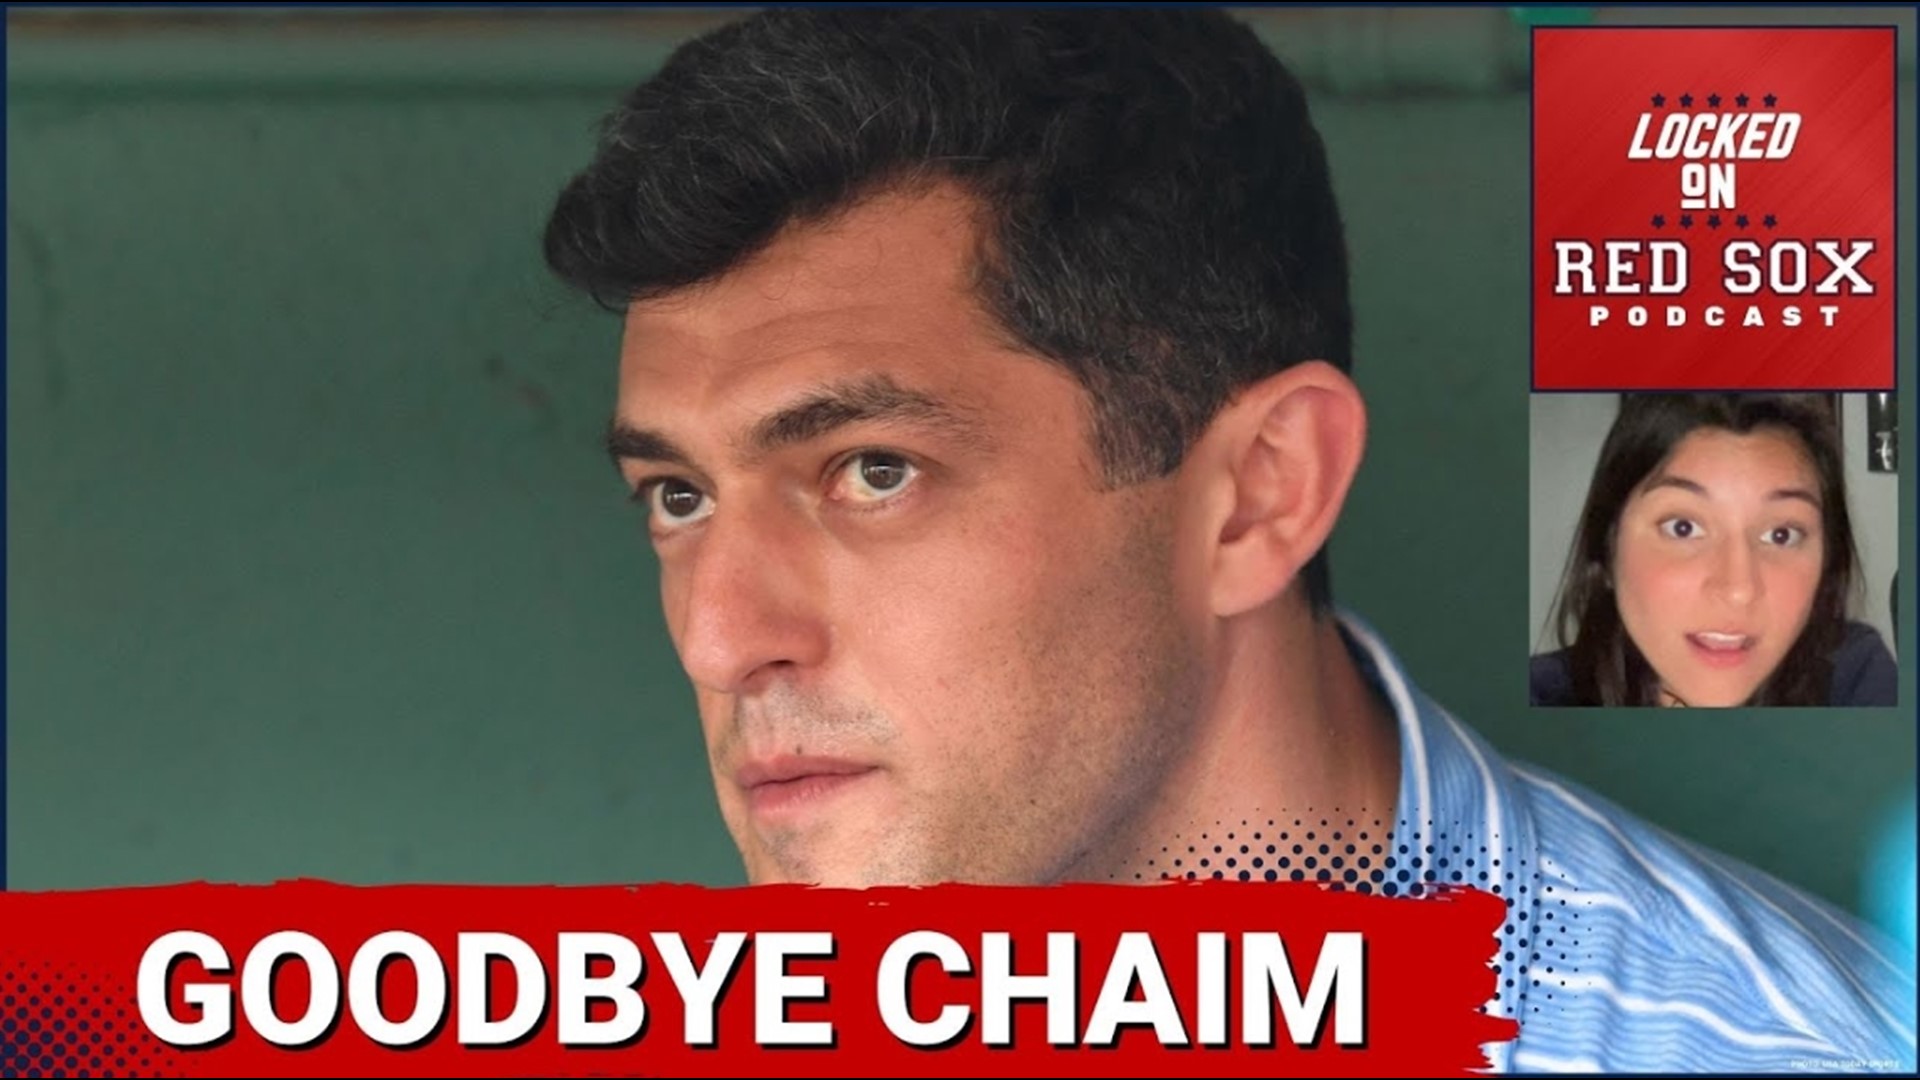 Wow! On what ended up being a very wild Thursday for the Boston Red Sox, Chaim Bloom was relieved of his duties as the Chief Baseball Officer.